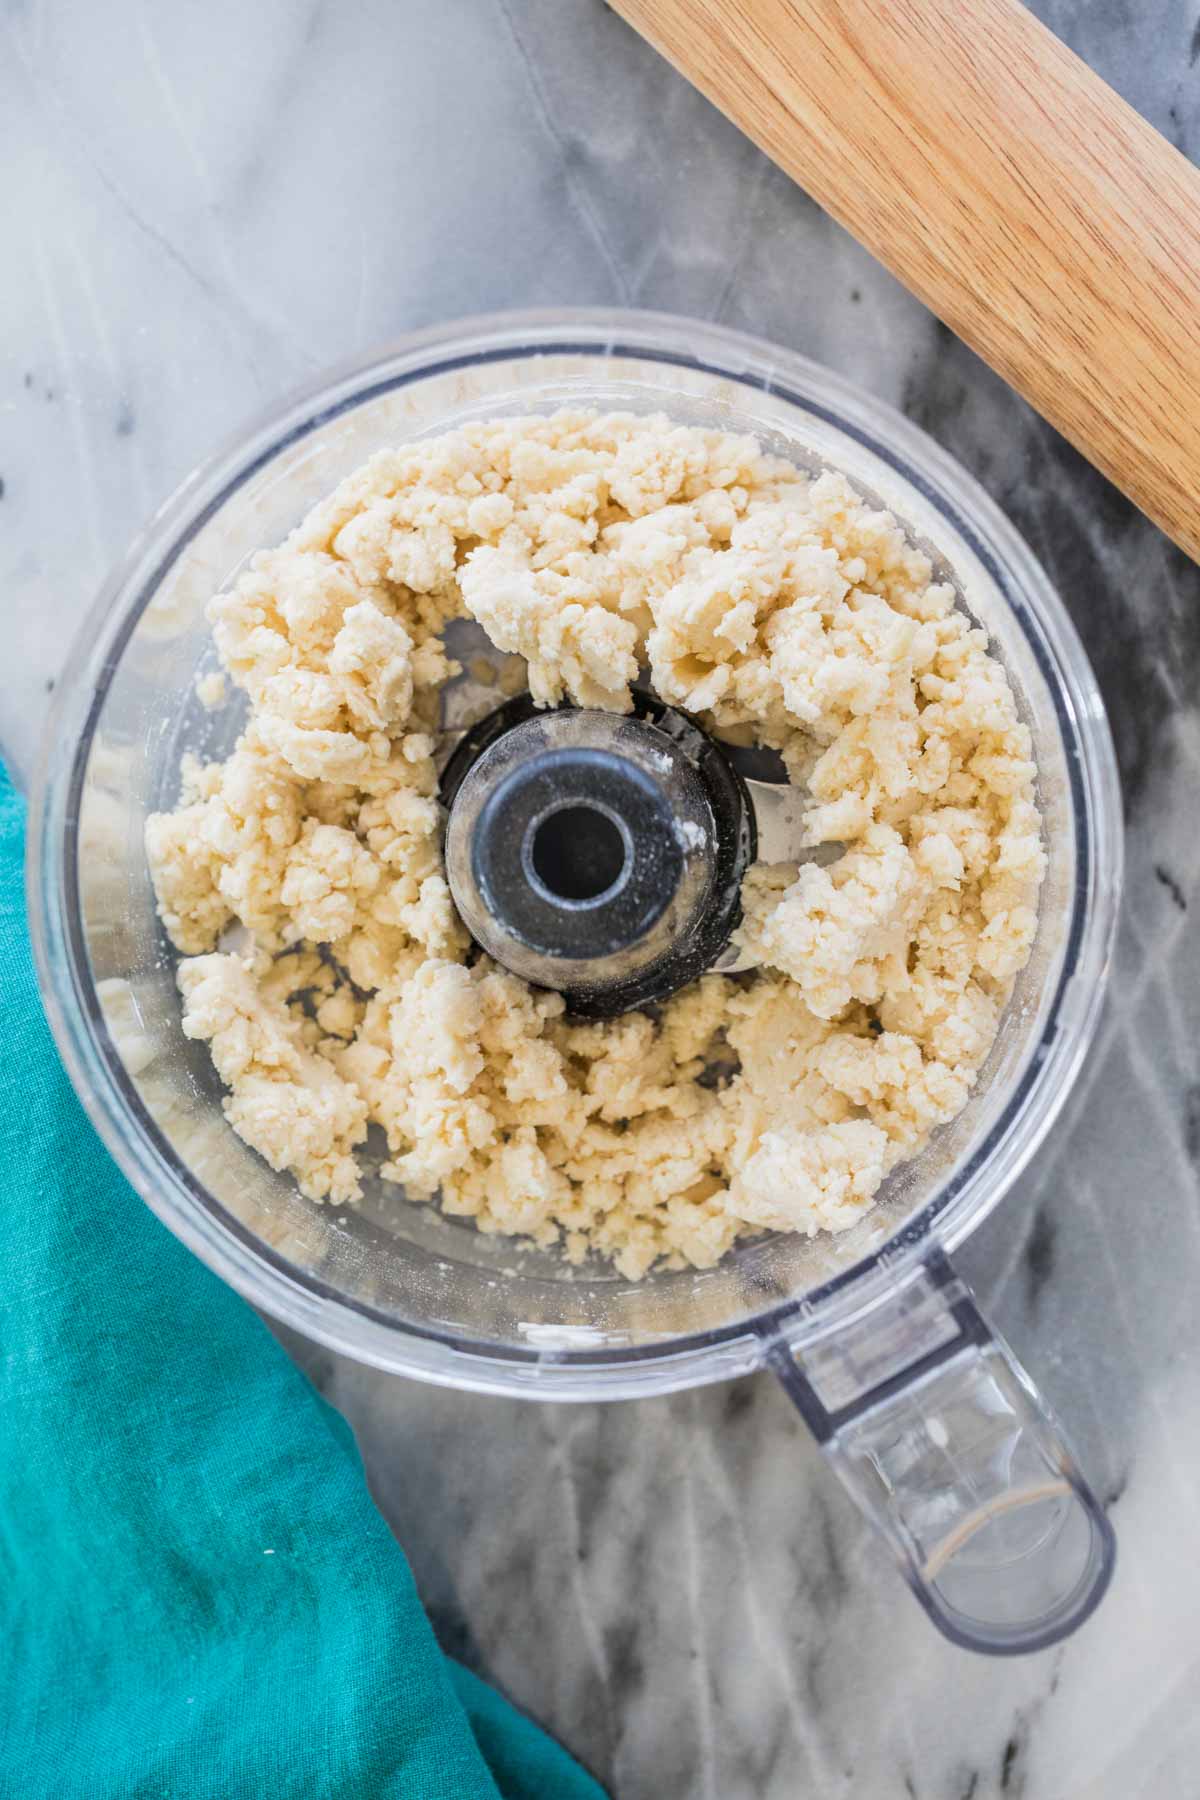 Homemade pie crust dough clinging together in food processor